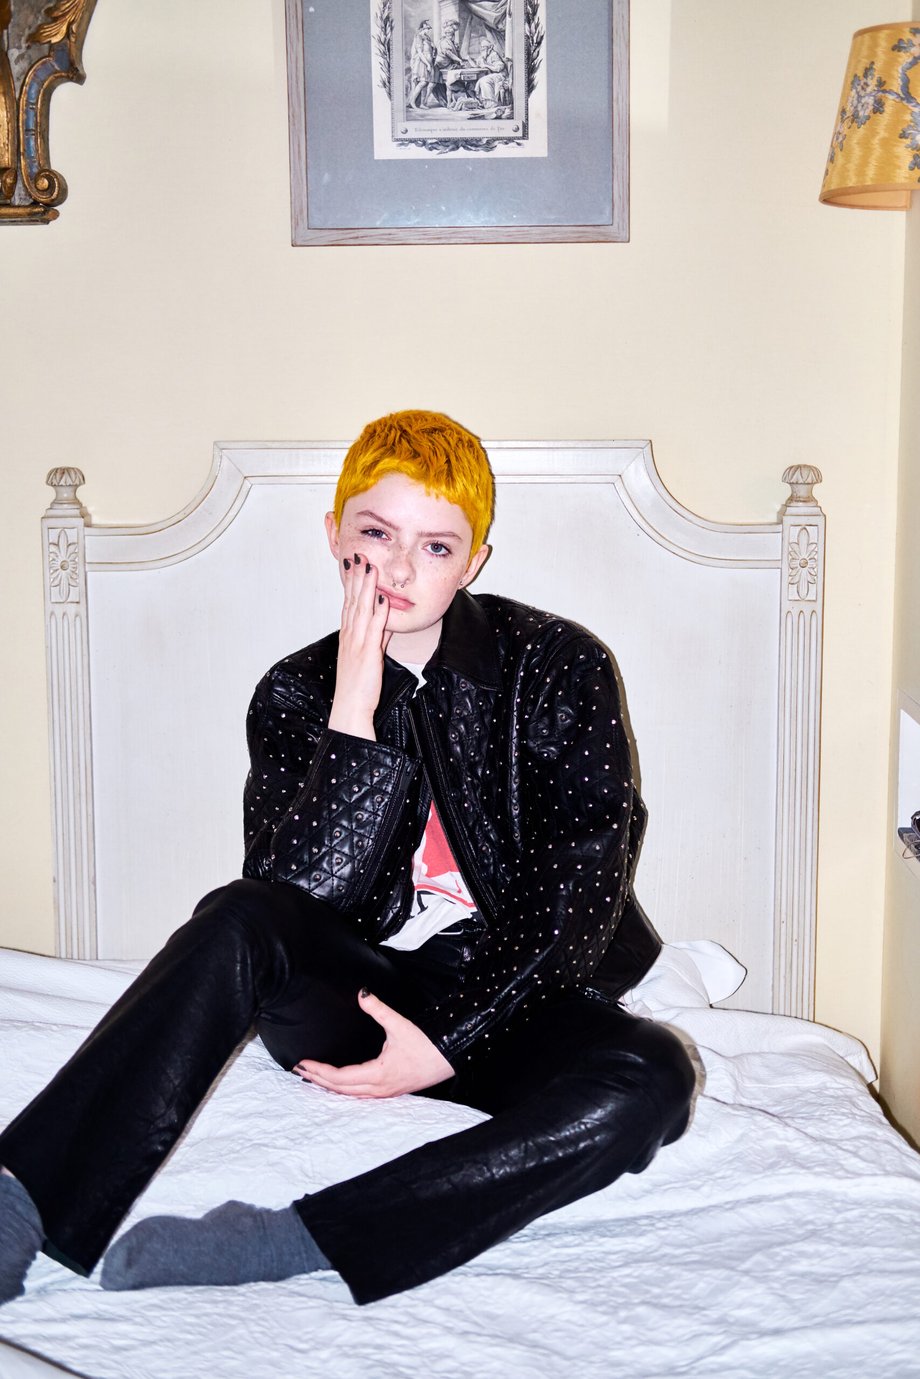 Jillian Clark's photo of Lachlan sitting on a bed in Paris, wearing a black studded jacket and black pants